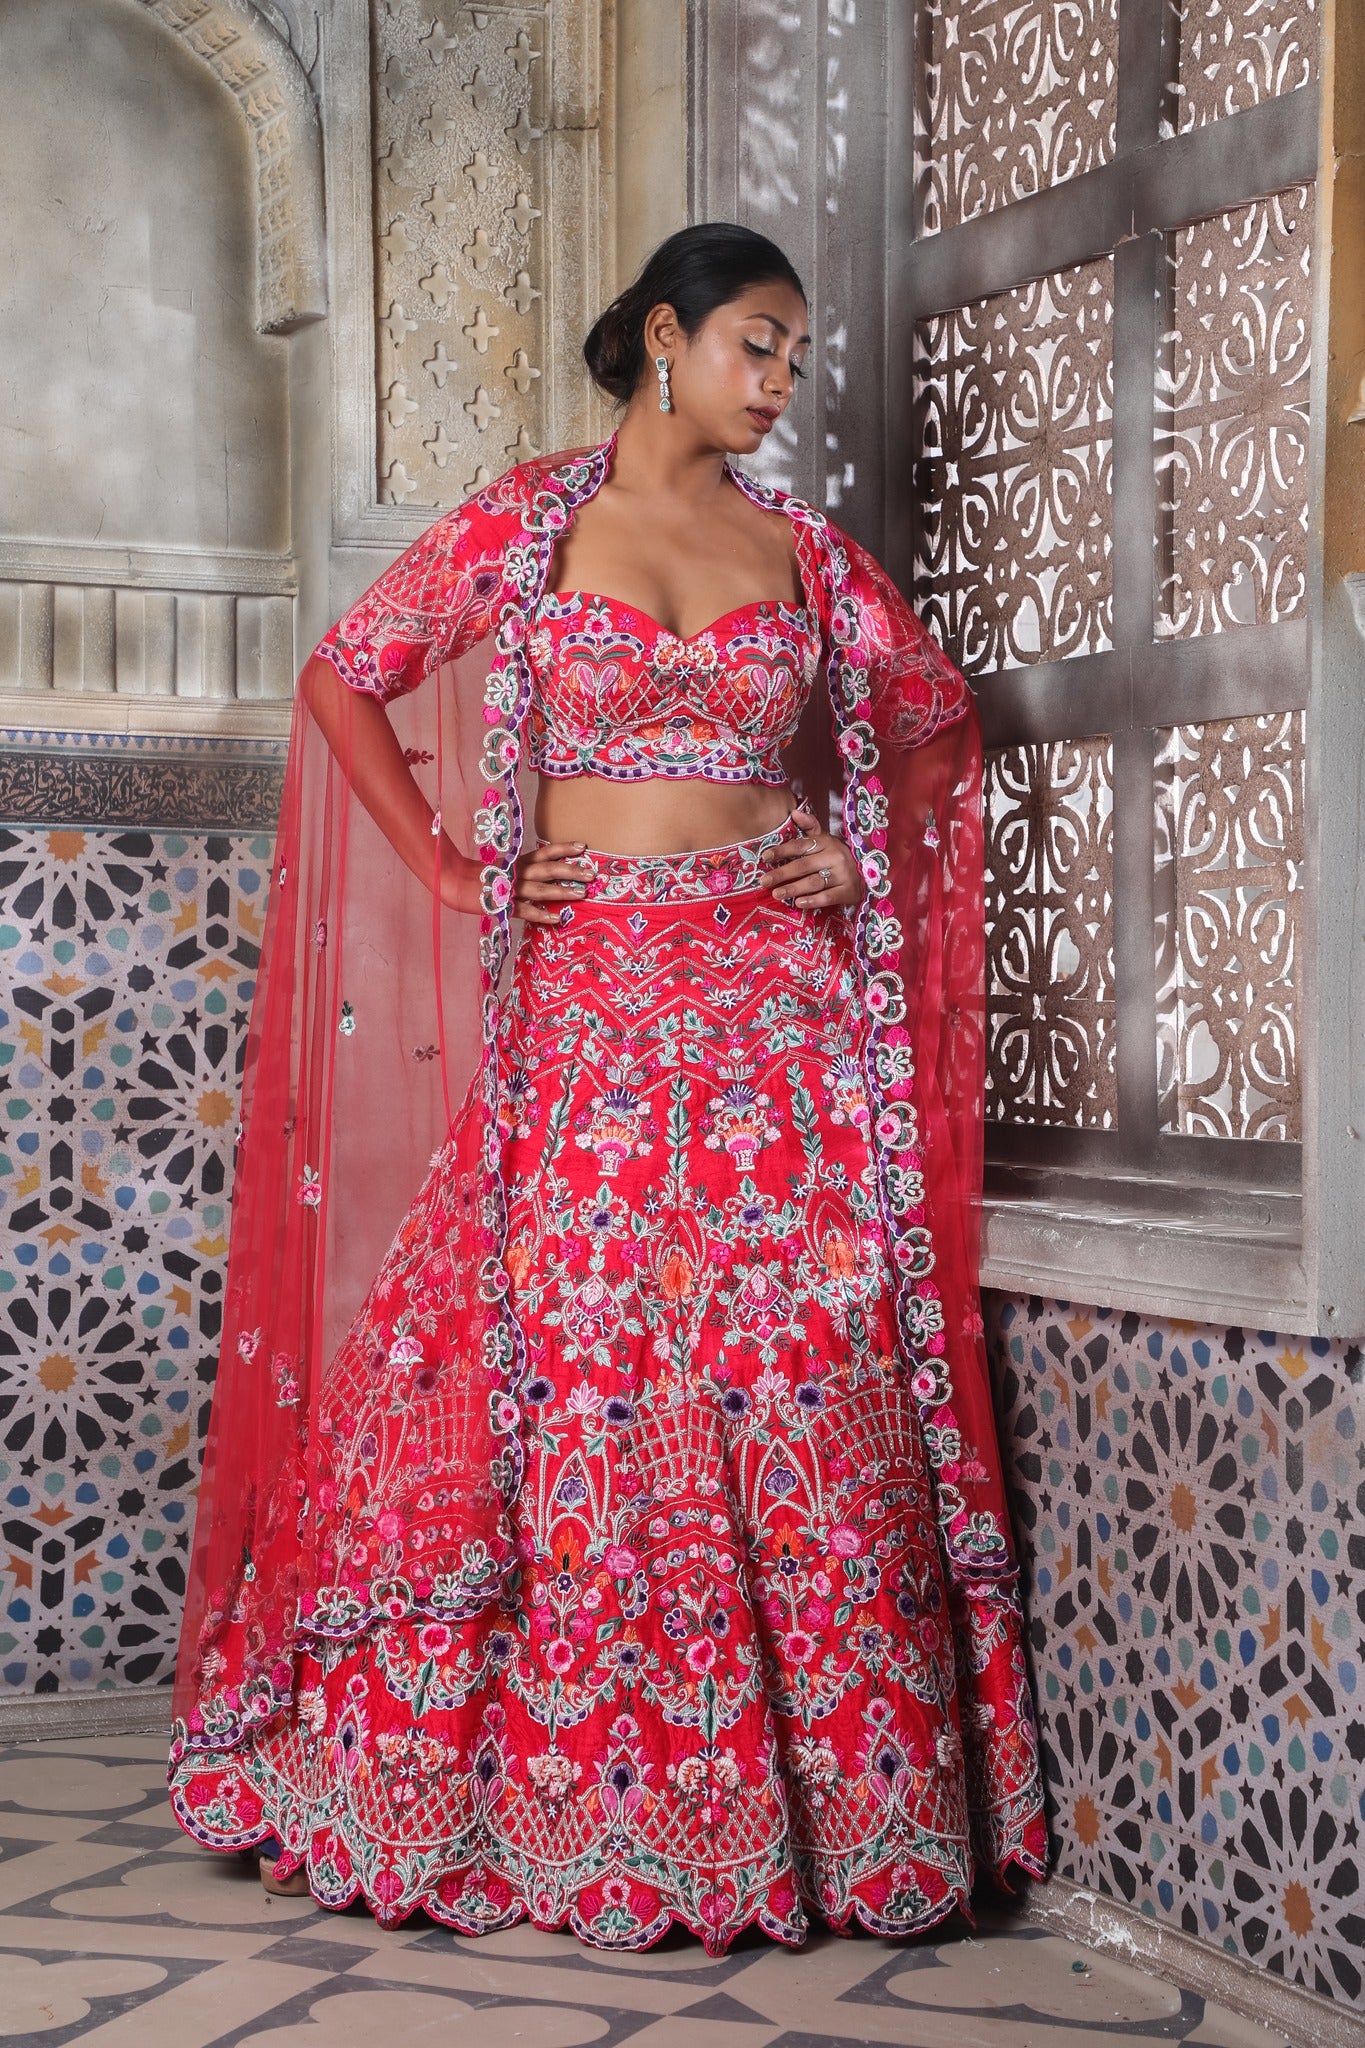 Pink Lehenga Choli With Multicolour Thread Embroidery And, Cutdana, Sequins, Pot Handwork